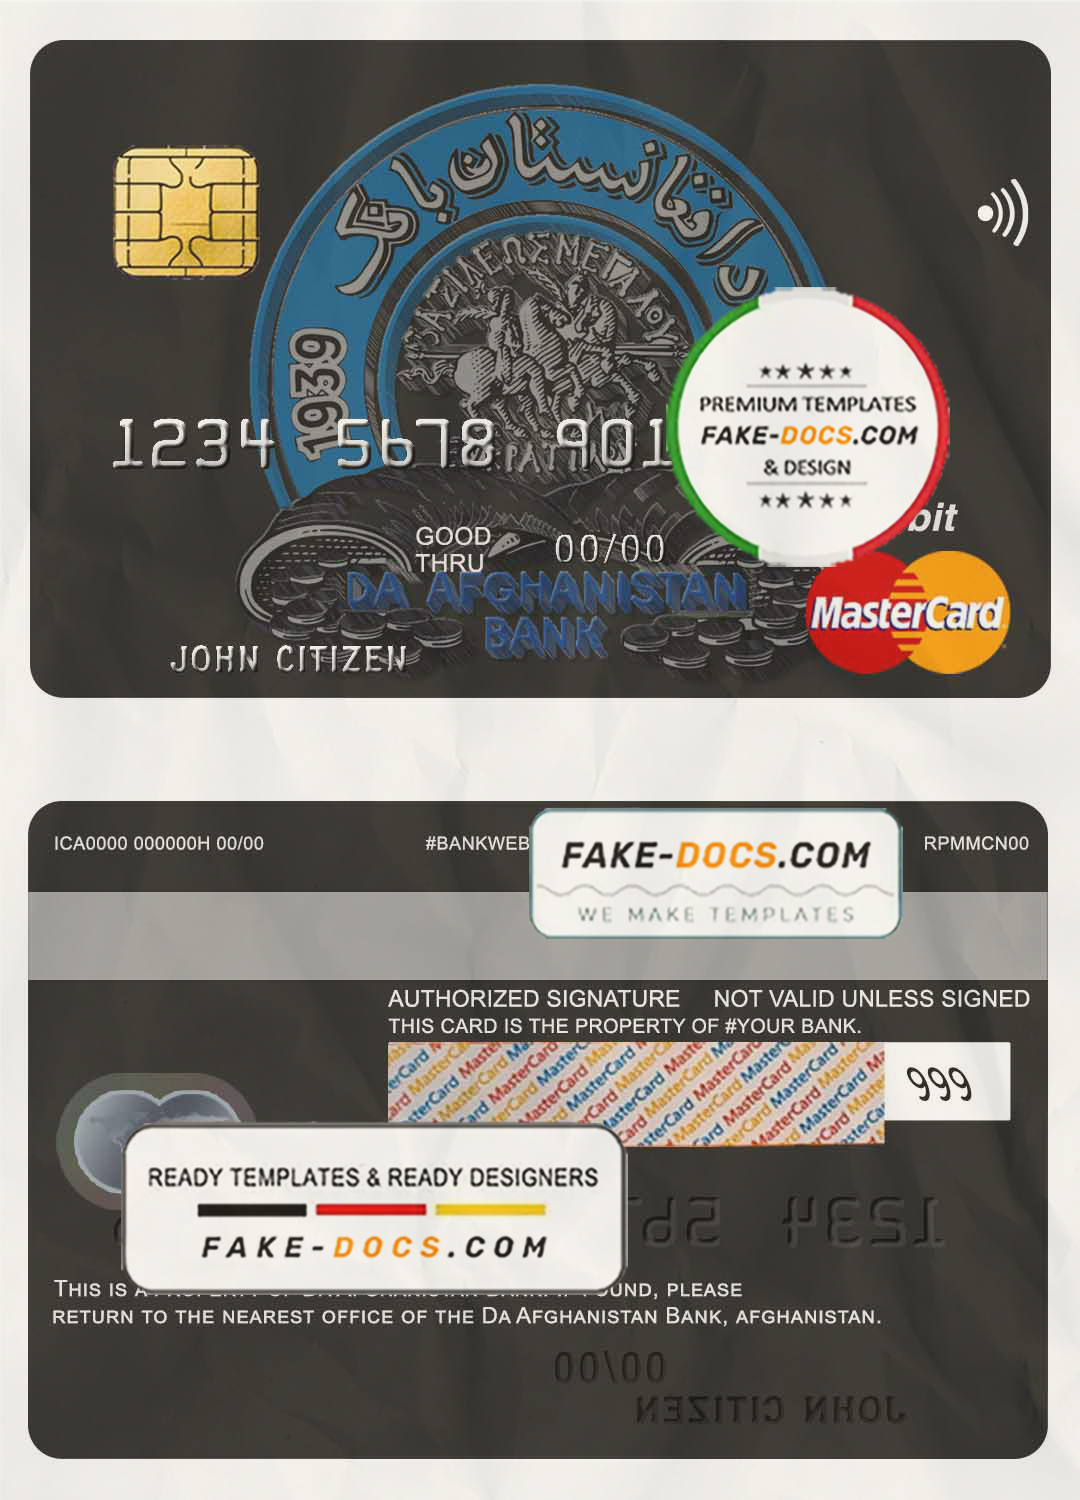 Afghanistan Da bank mastercard template in PSD format, fully editable scan